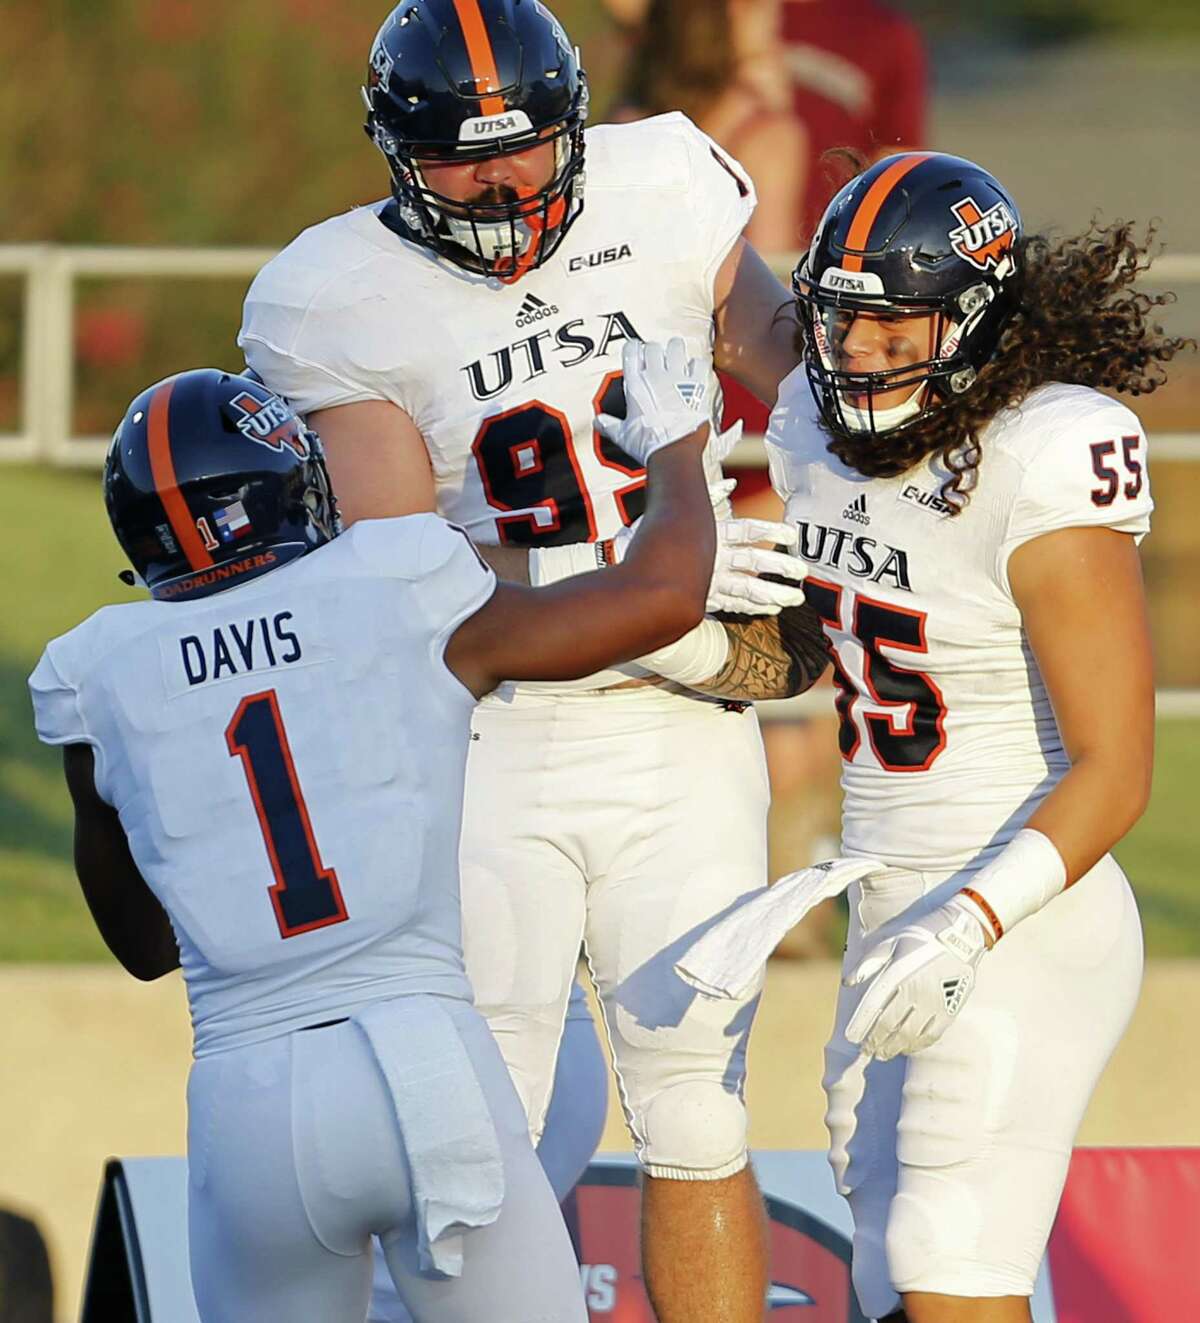 UTSA Roadrunners linebacker Josiah Tauaefa (55), right, celebrates with teammates UTSA Roadrunners cornerback Devron Davis (1) and UTSA Roadrunners defensive end Baylen Baker (99) after scoring a touchdown on a fumble recovery against the Texas State Bobcats during first half action on Sept. 23, 2017 at Bobcat Stadium in San Marcos.